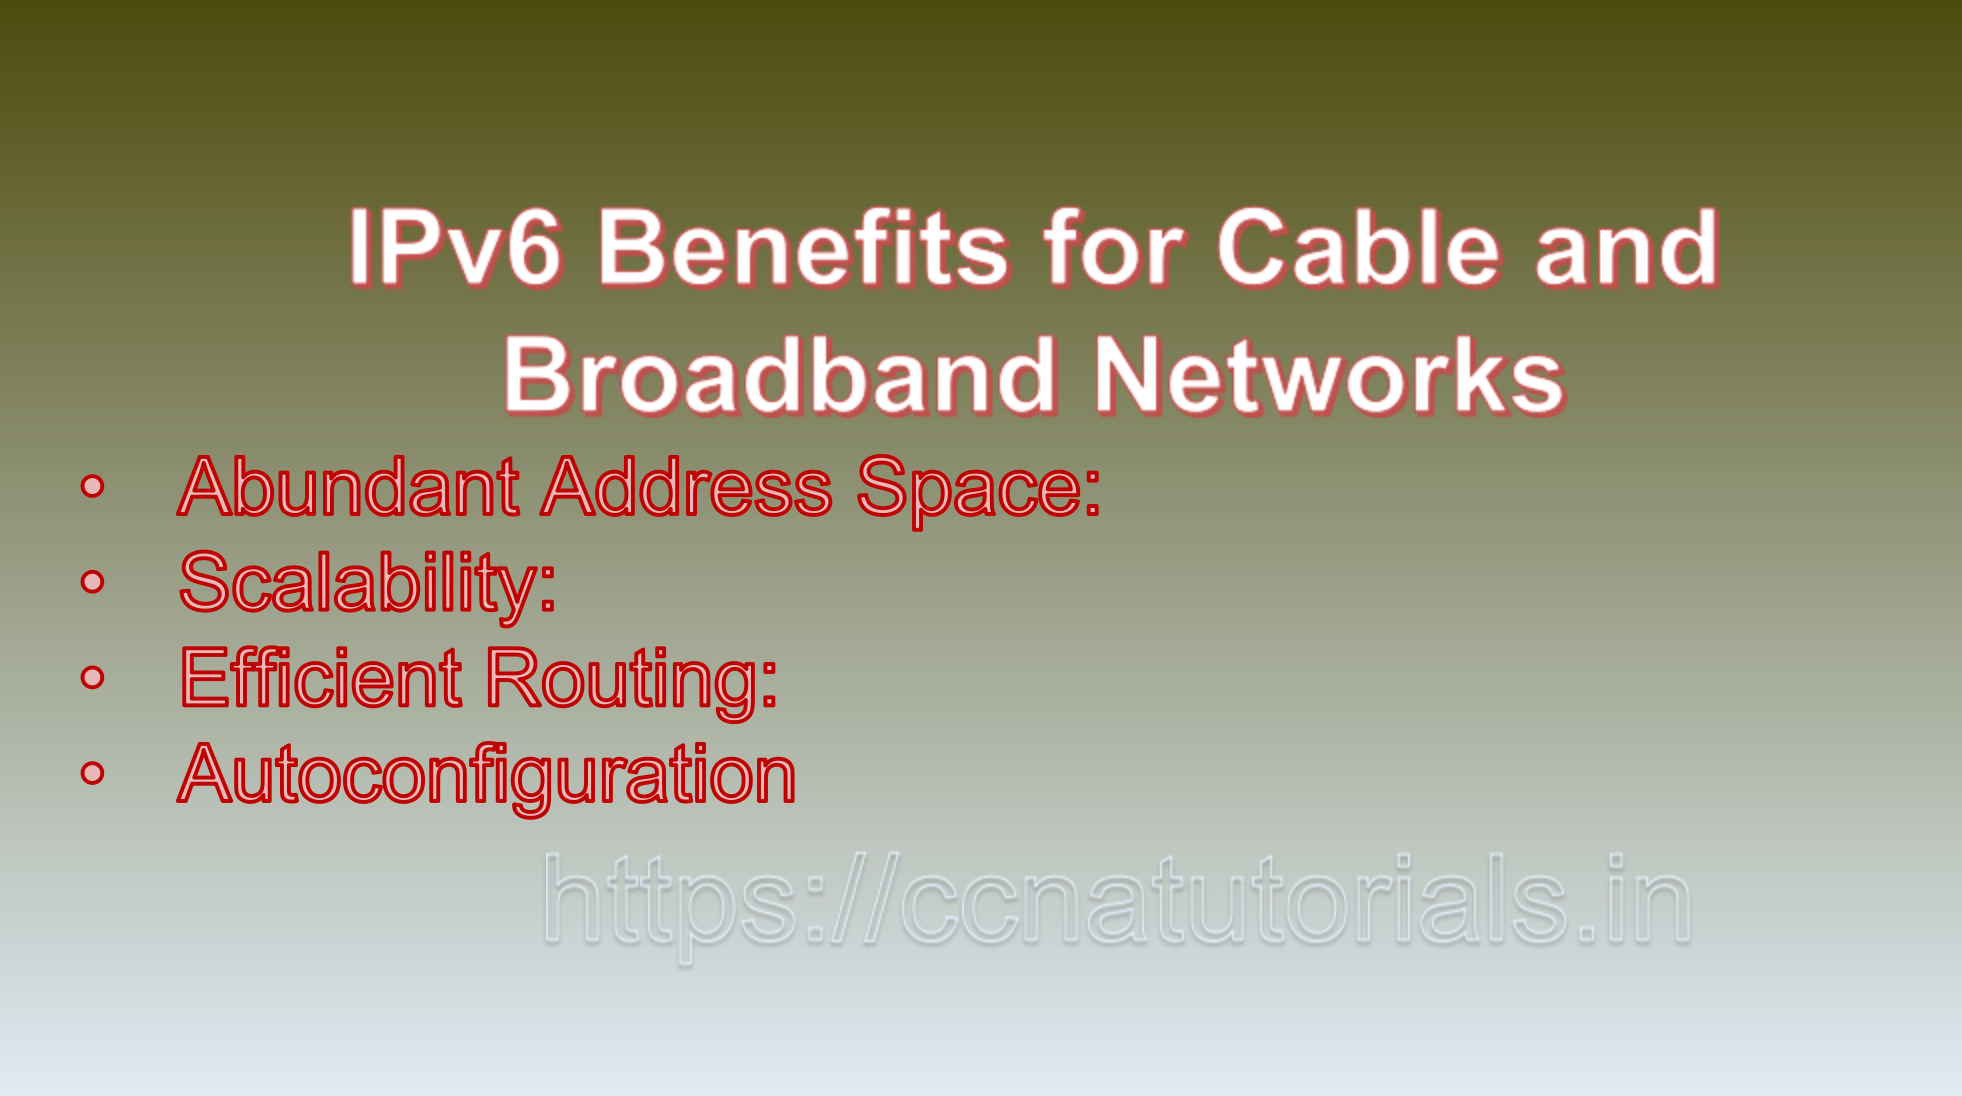 IPv6 in Cable and Broadband Networks, ccna, ccna tutorials